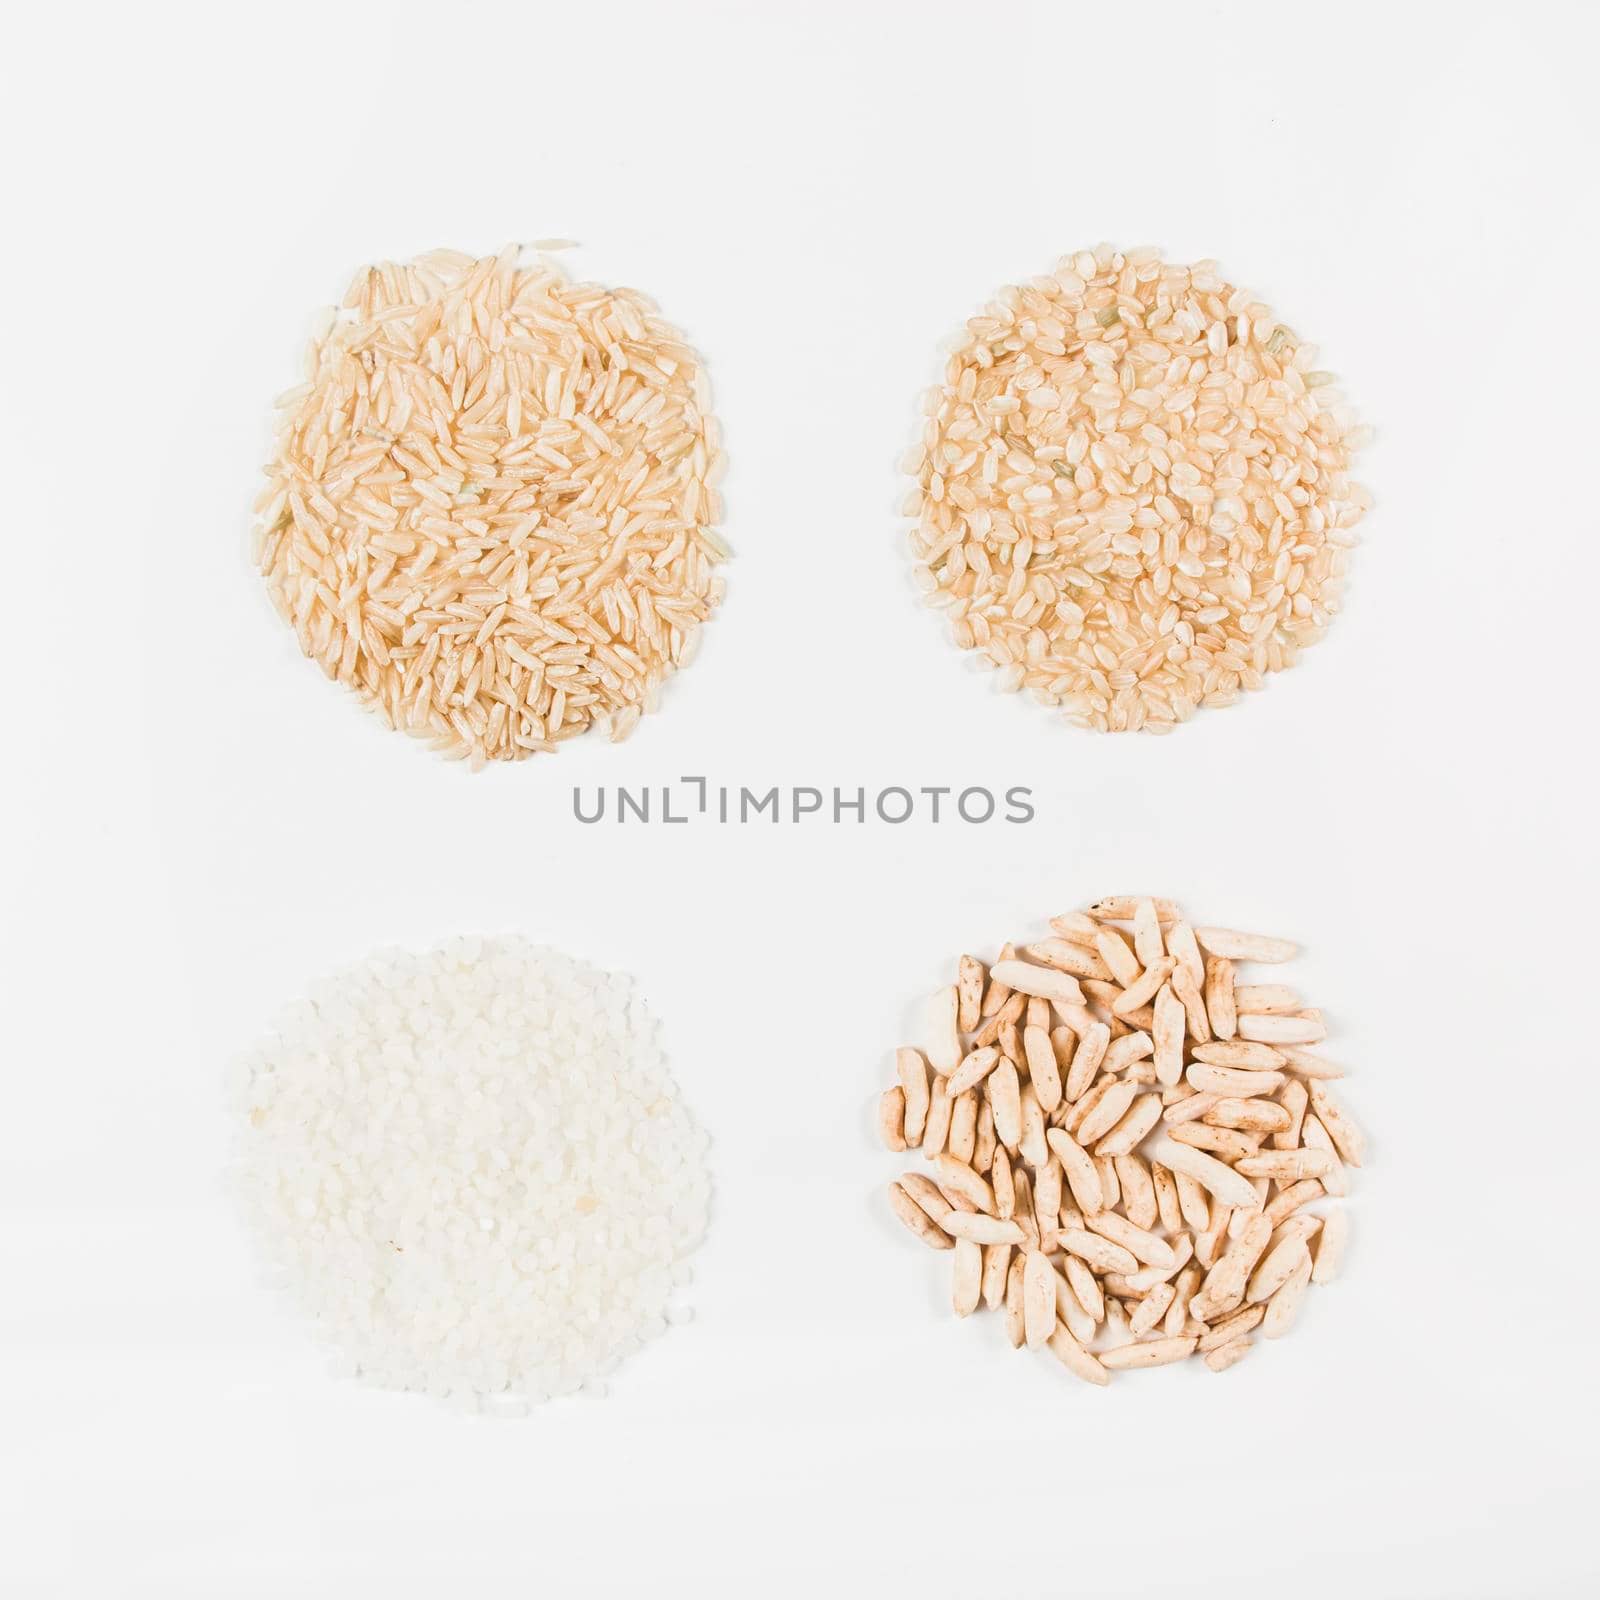 uncooked white brown puffed rice isolated white backdrop. High quality photo by Zahard